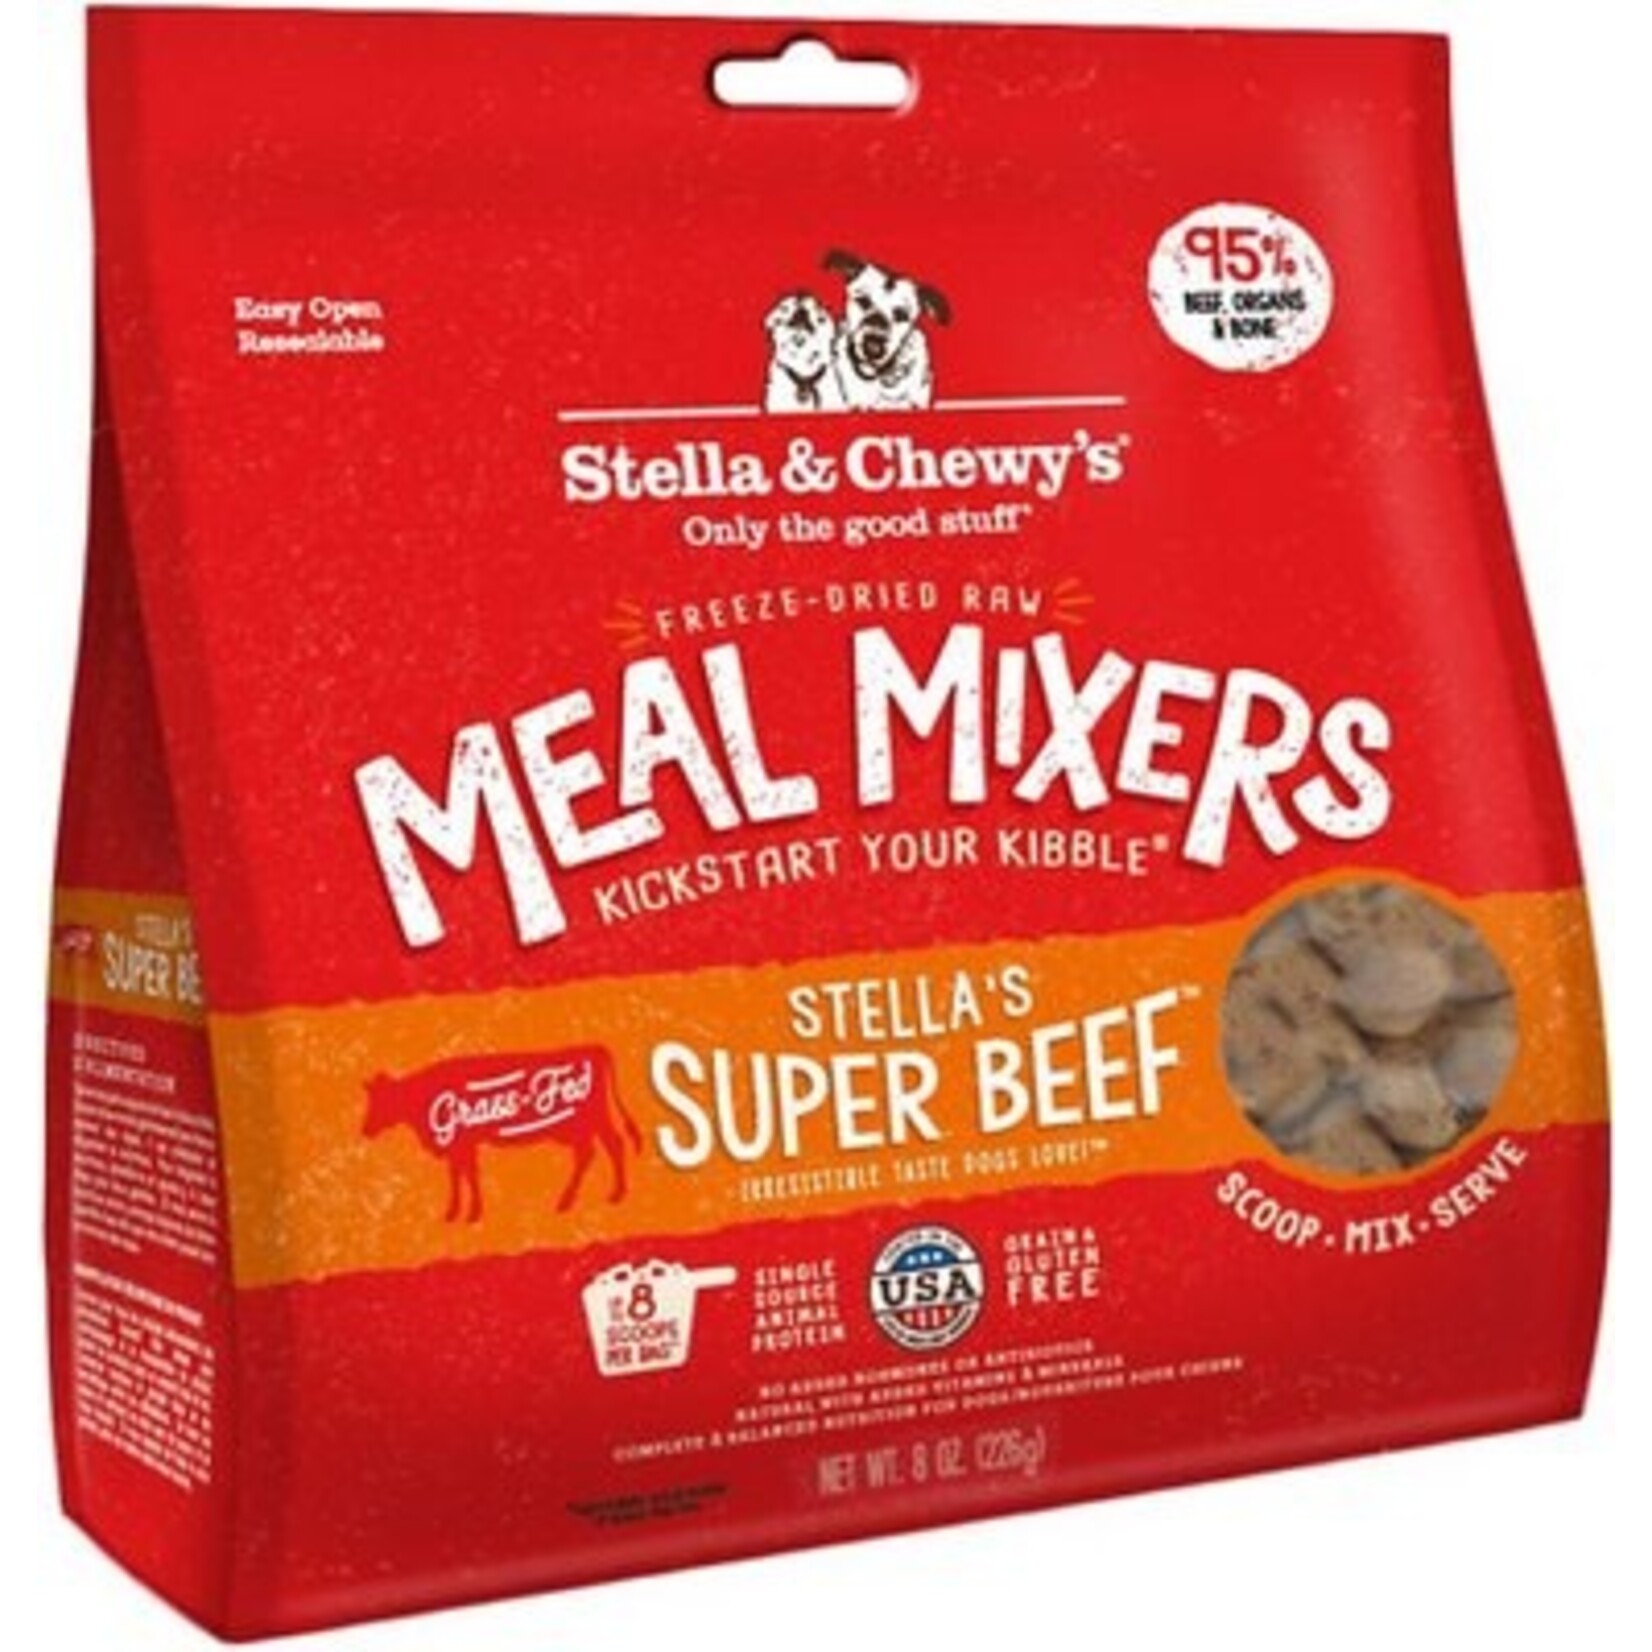 Stella & Chewy's Super Beef - Freeze-Dried Meal Mixer - Stella & Chewy's